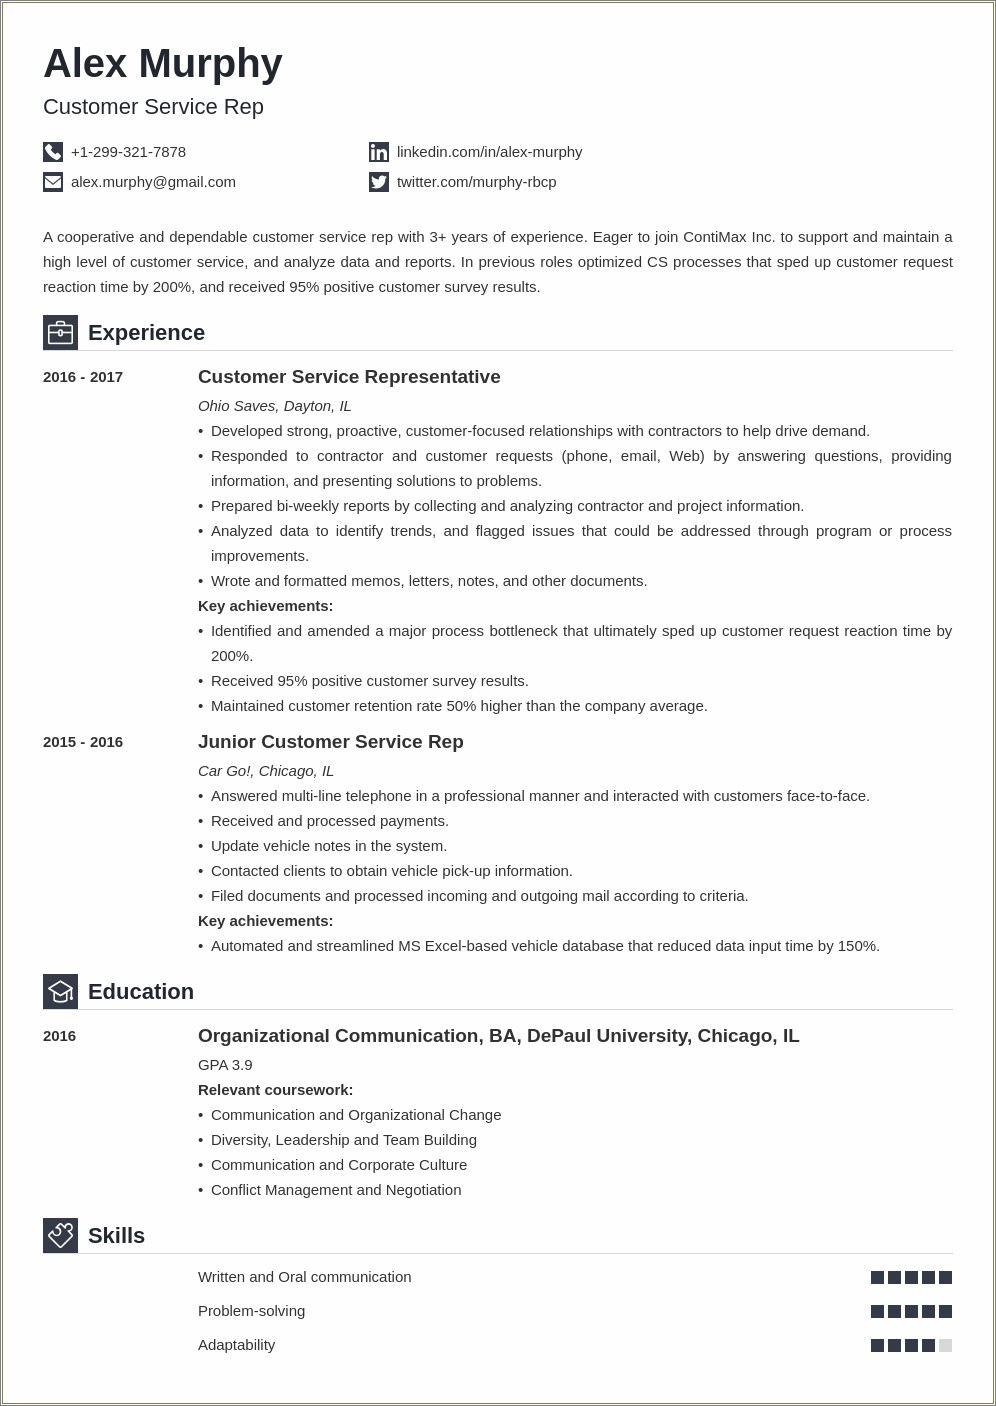 Listing Course Work On A Resume